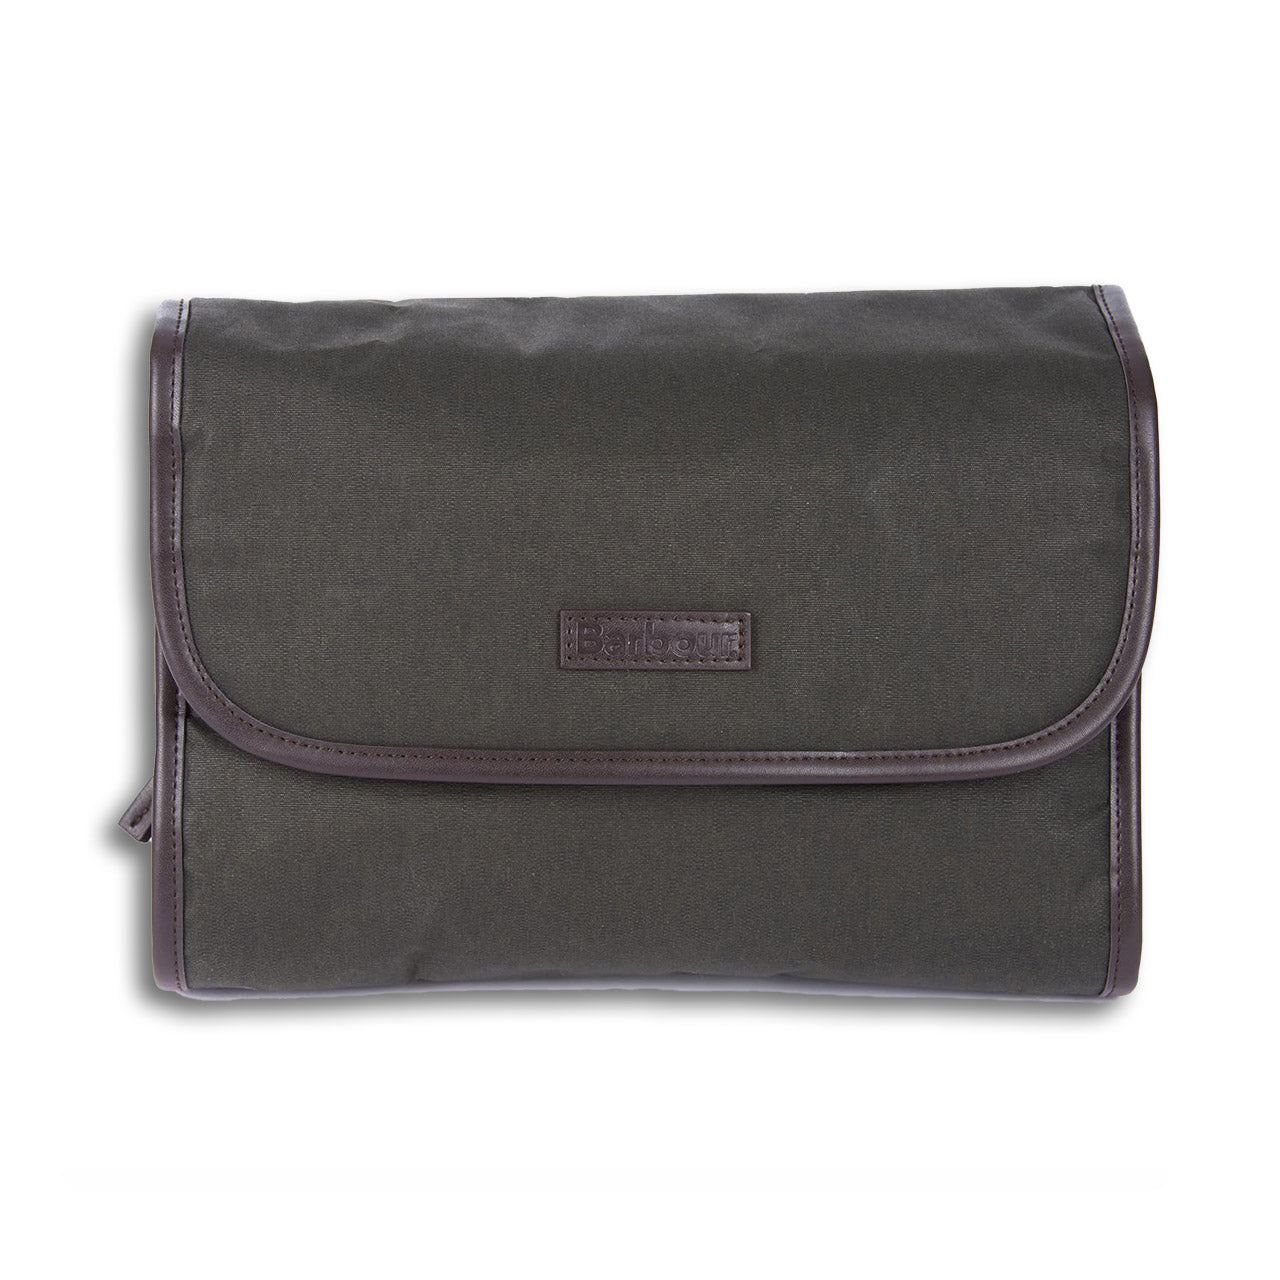 Barbour Waxed Hanging Wash Bag